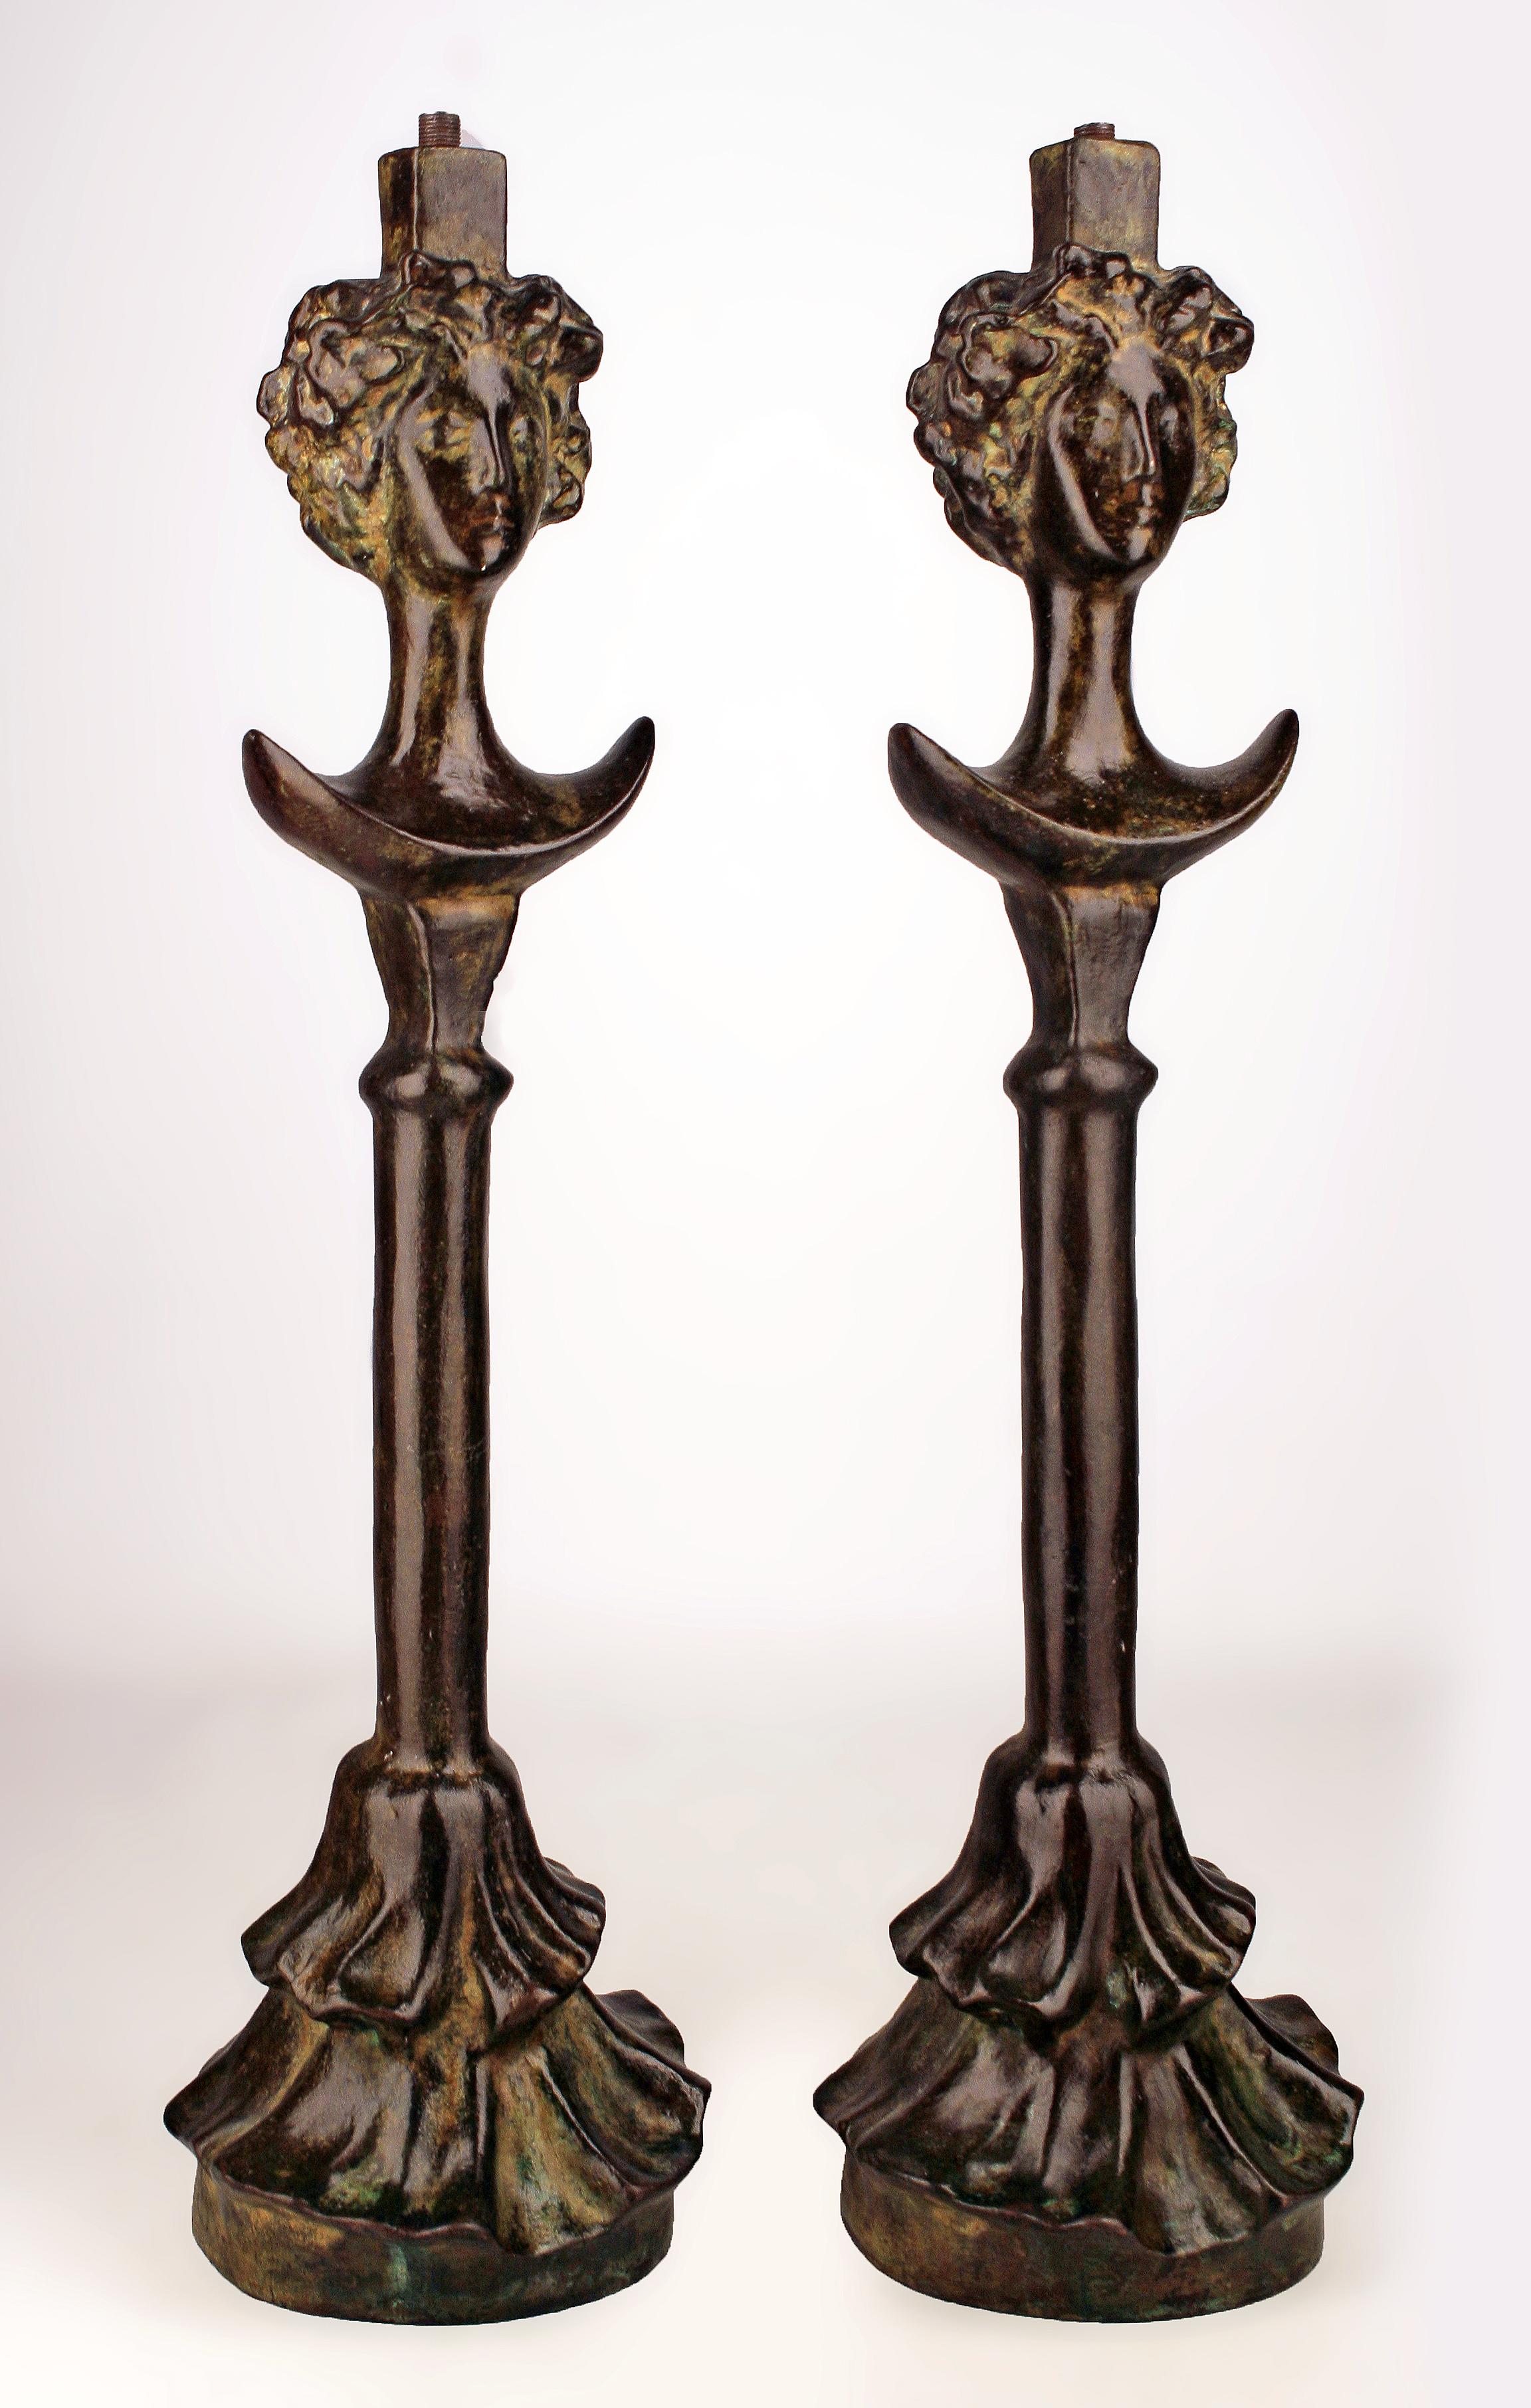 Pair of Expressionist patinated bronze table lamps based on Giacometti's 'Tête de Femme' (Head of a Woman) from the Rockefeller Collection

By: Alberto and Diego Giacometti
Material: bronze, metal, copper
Technique: cast, patinated, metalwork,